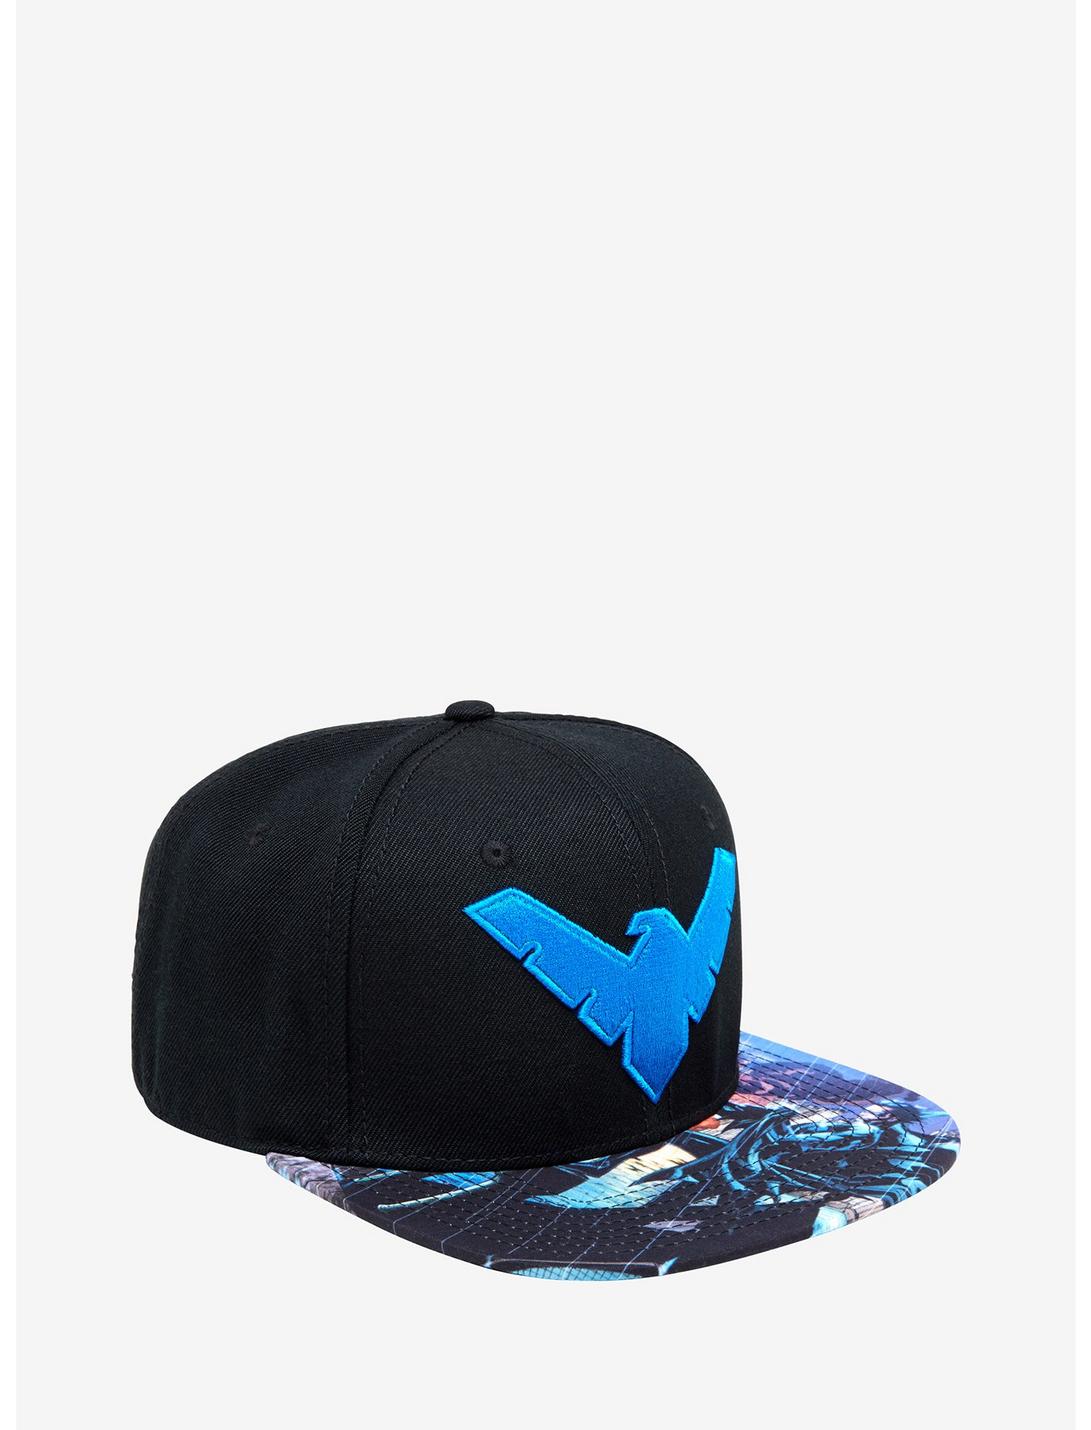 DC Comics Nightwing Sublimated Snapback Hat, , hi-res